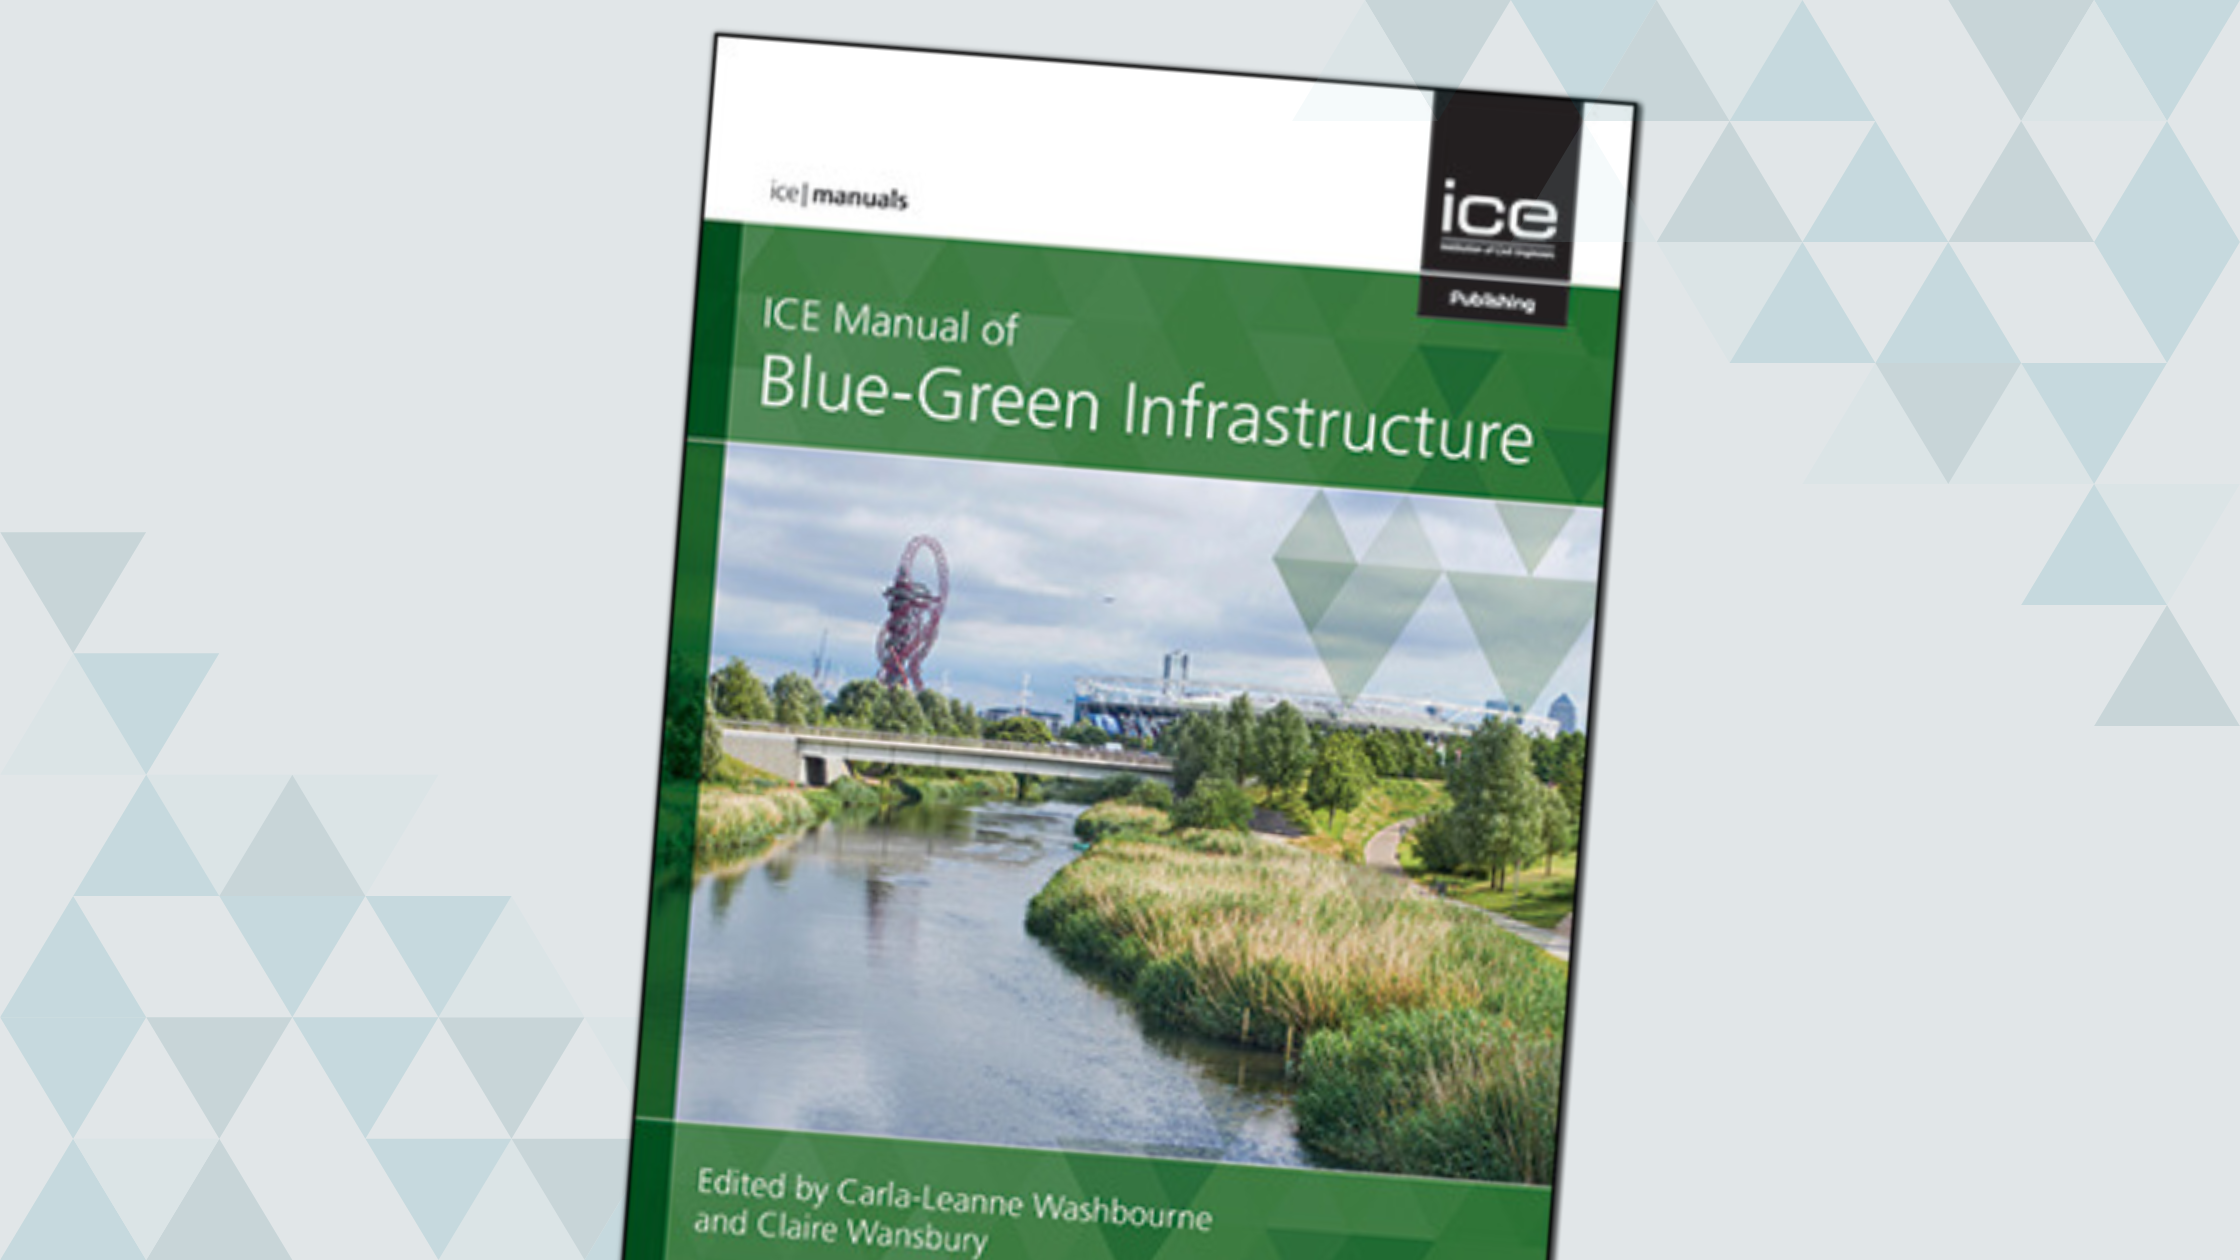 ICE Manual of Blue-Green Infrastructure